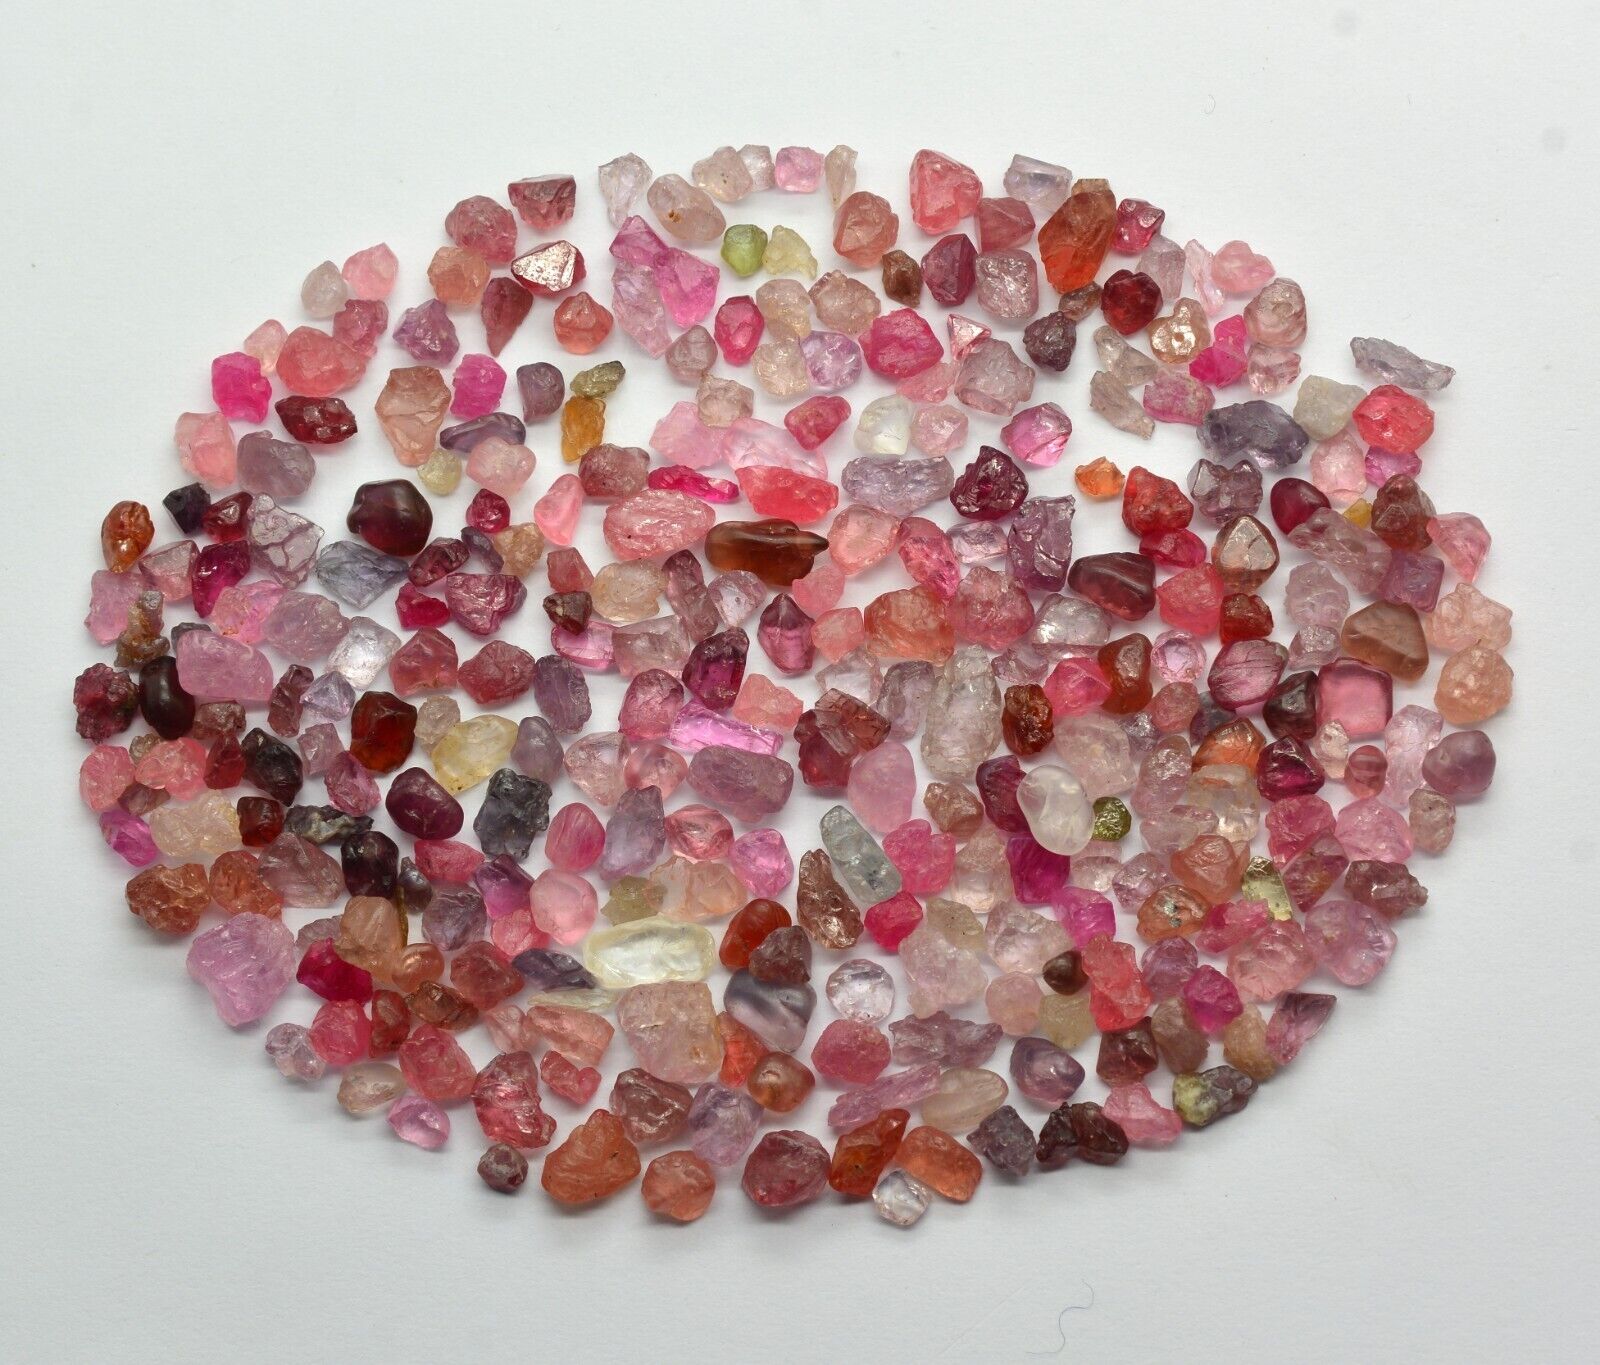 100 Carat Very Beautiful Spinel Crystals Lot From South Africa